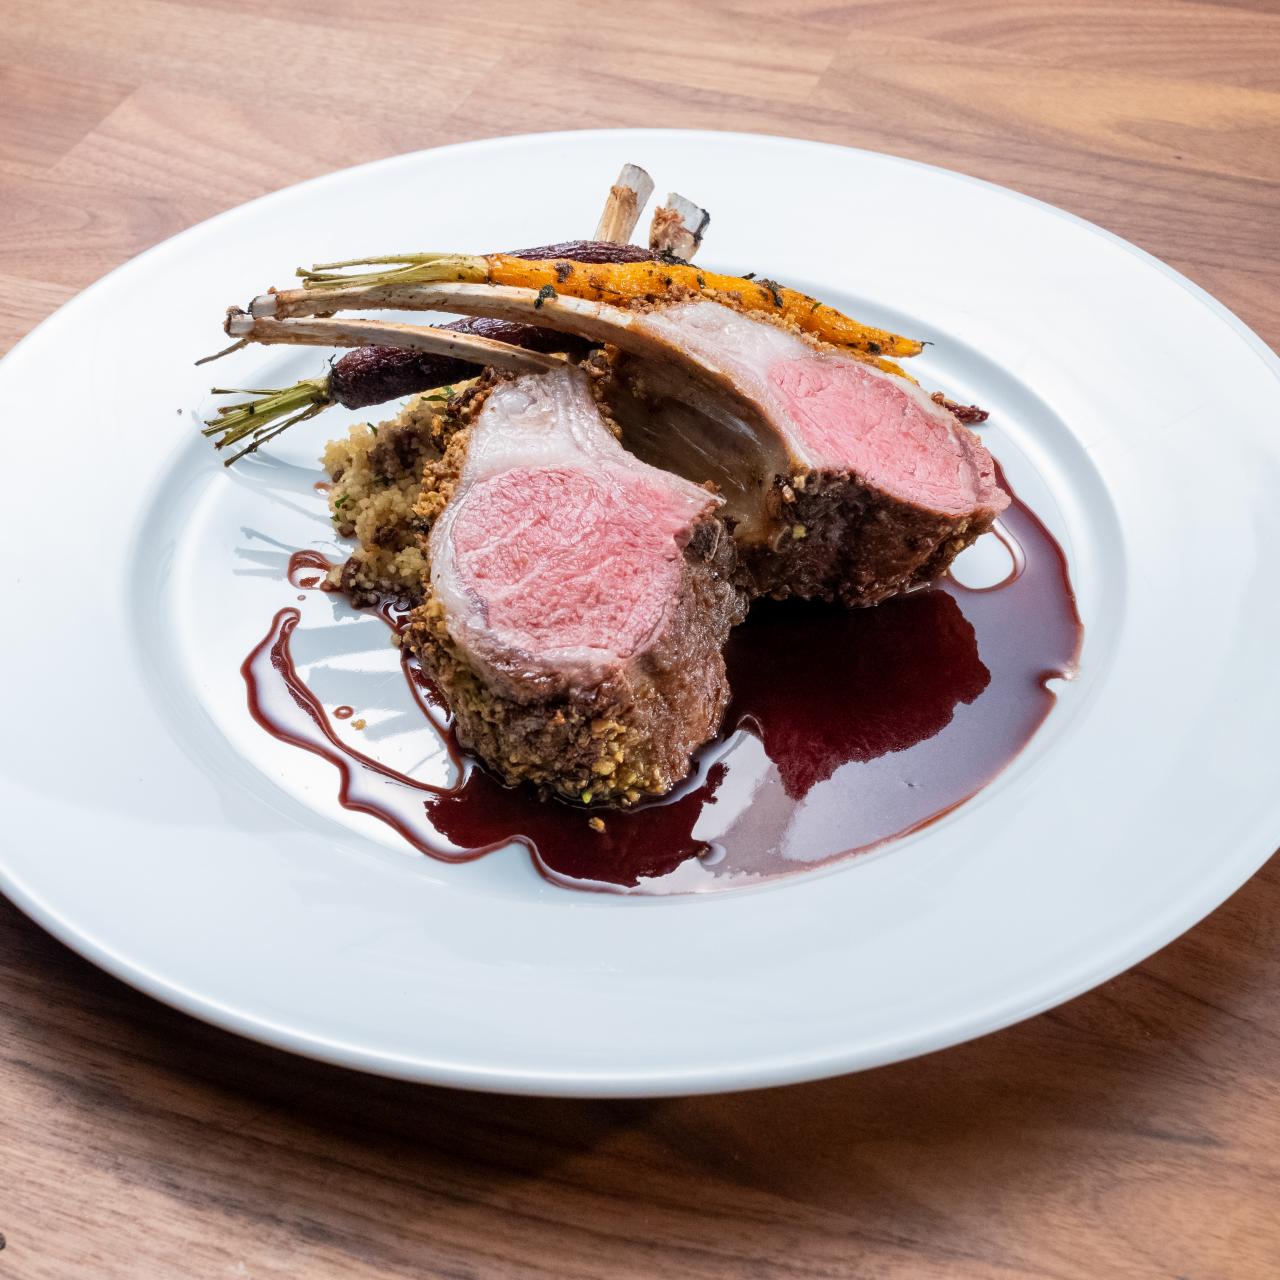 https://food.fnr.sndimg.com/content/dam/images/food/fullset/2021/12/16/0/WO2404_pistachio-crusted-rack-of-lamb-with-date-couscous-and-spiced-carrots-2_s4x3.jpg.rend.hgtvcom.1280.1280.suffix/1639686981077.jpeg